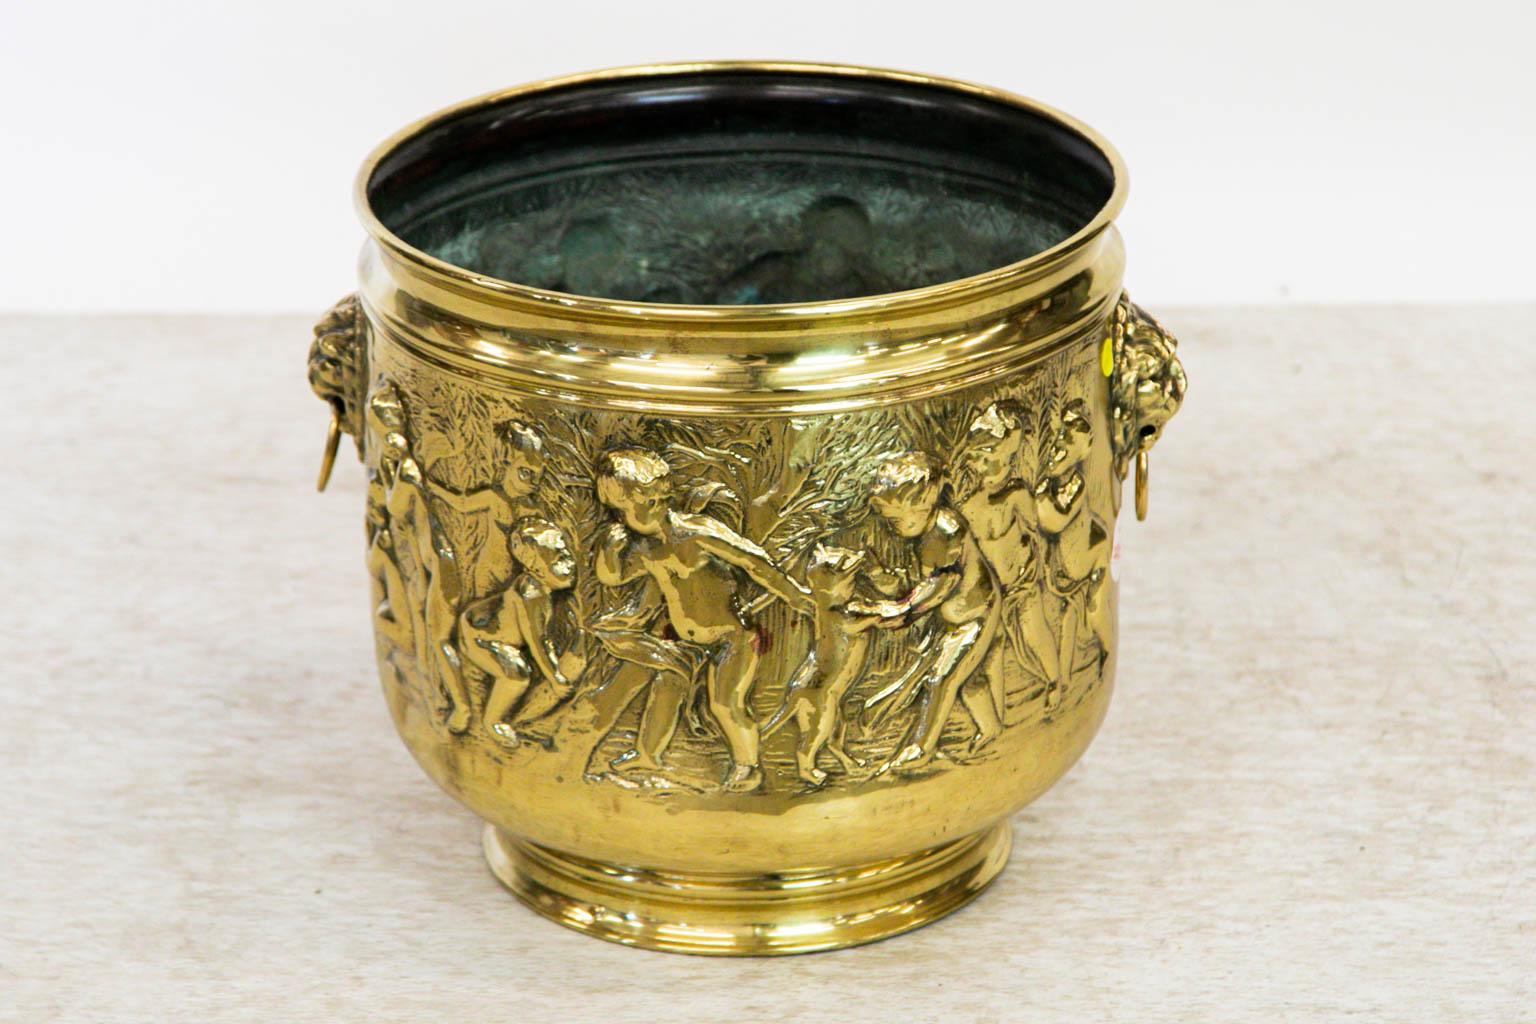 This brass can has large raised lion head pulls on the sides. There are raised allegorical and cupidlike figures in high relief. It has been polished and lacquered for ease of maintenance.